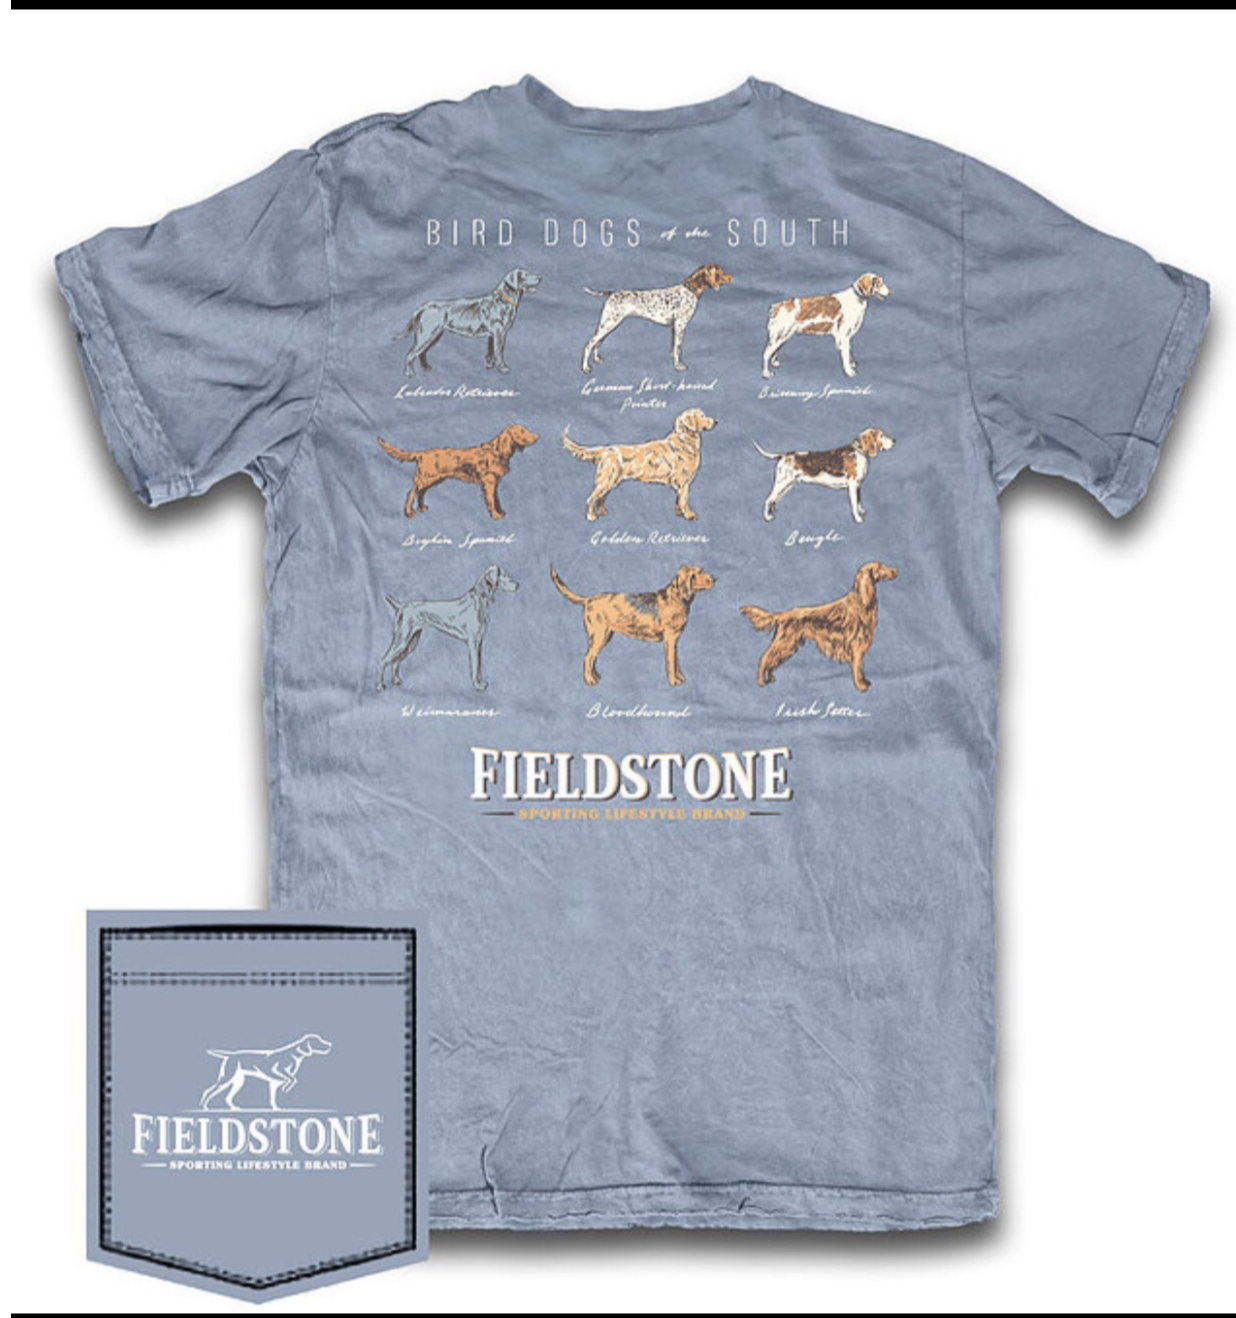 Youth Fieldstone bird dogs of the south tee